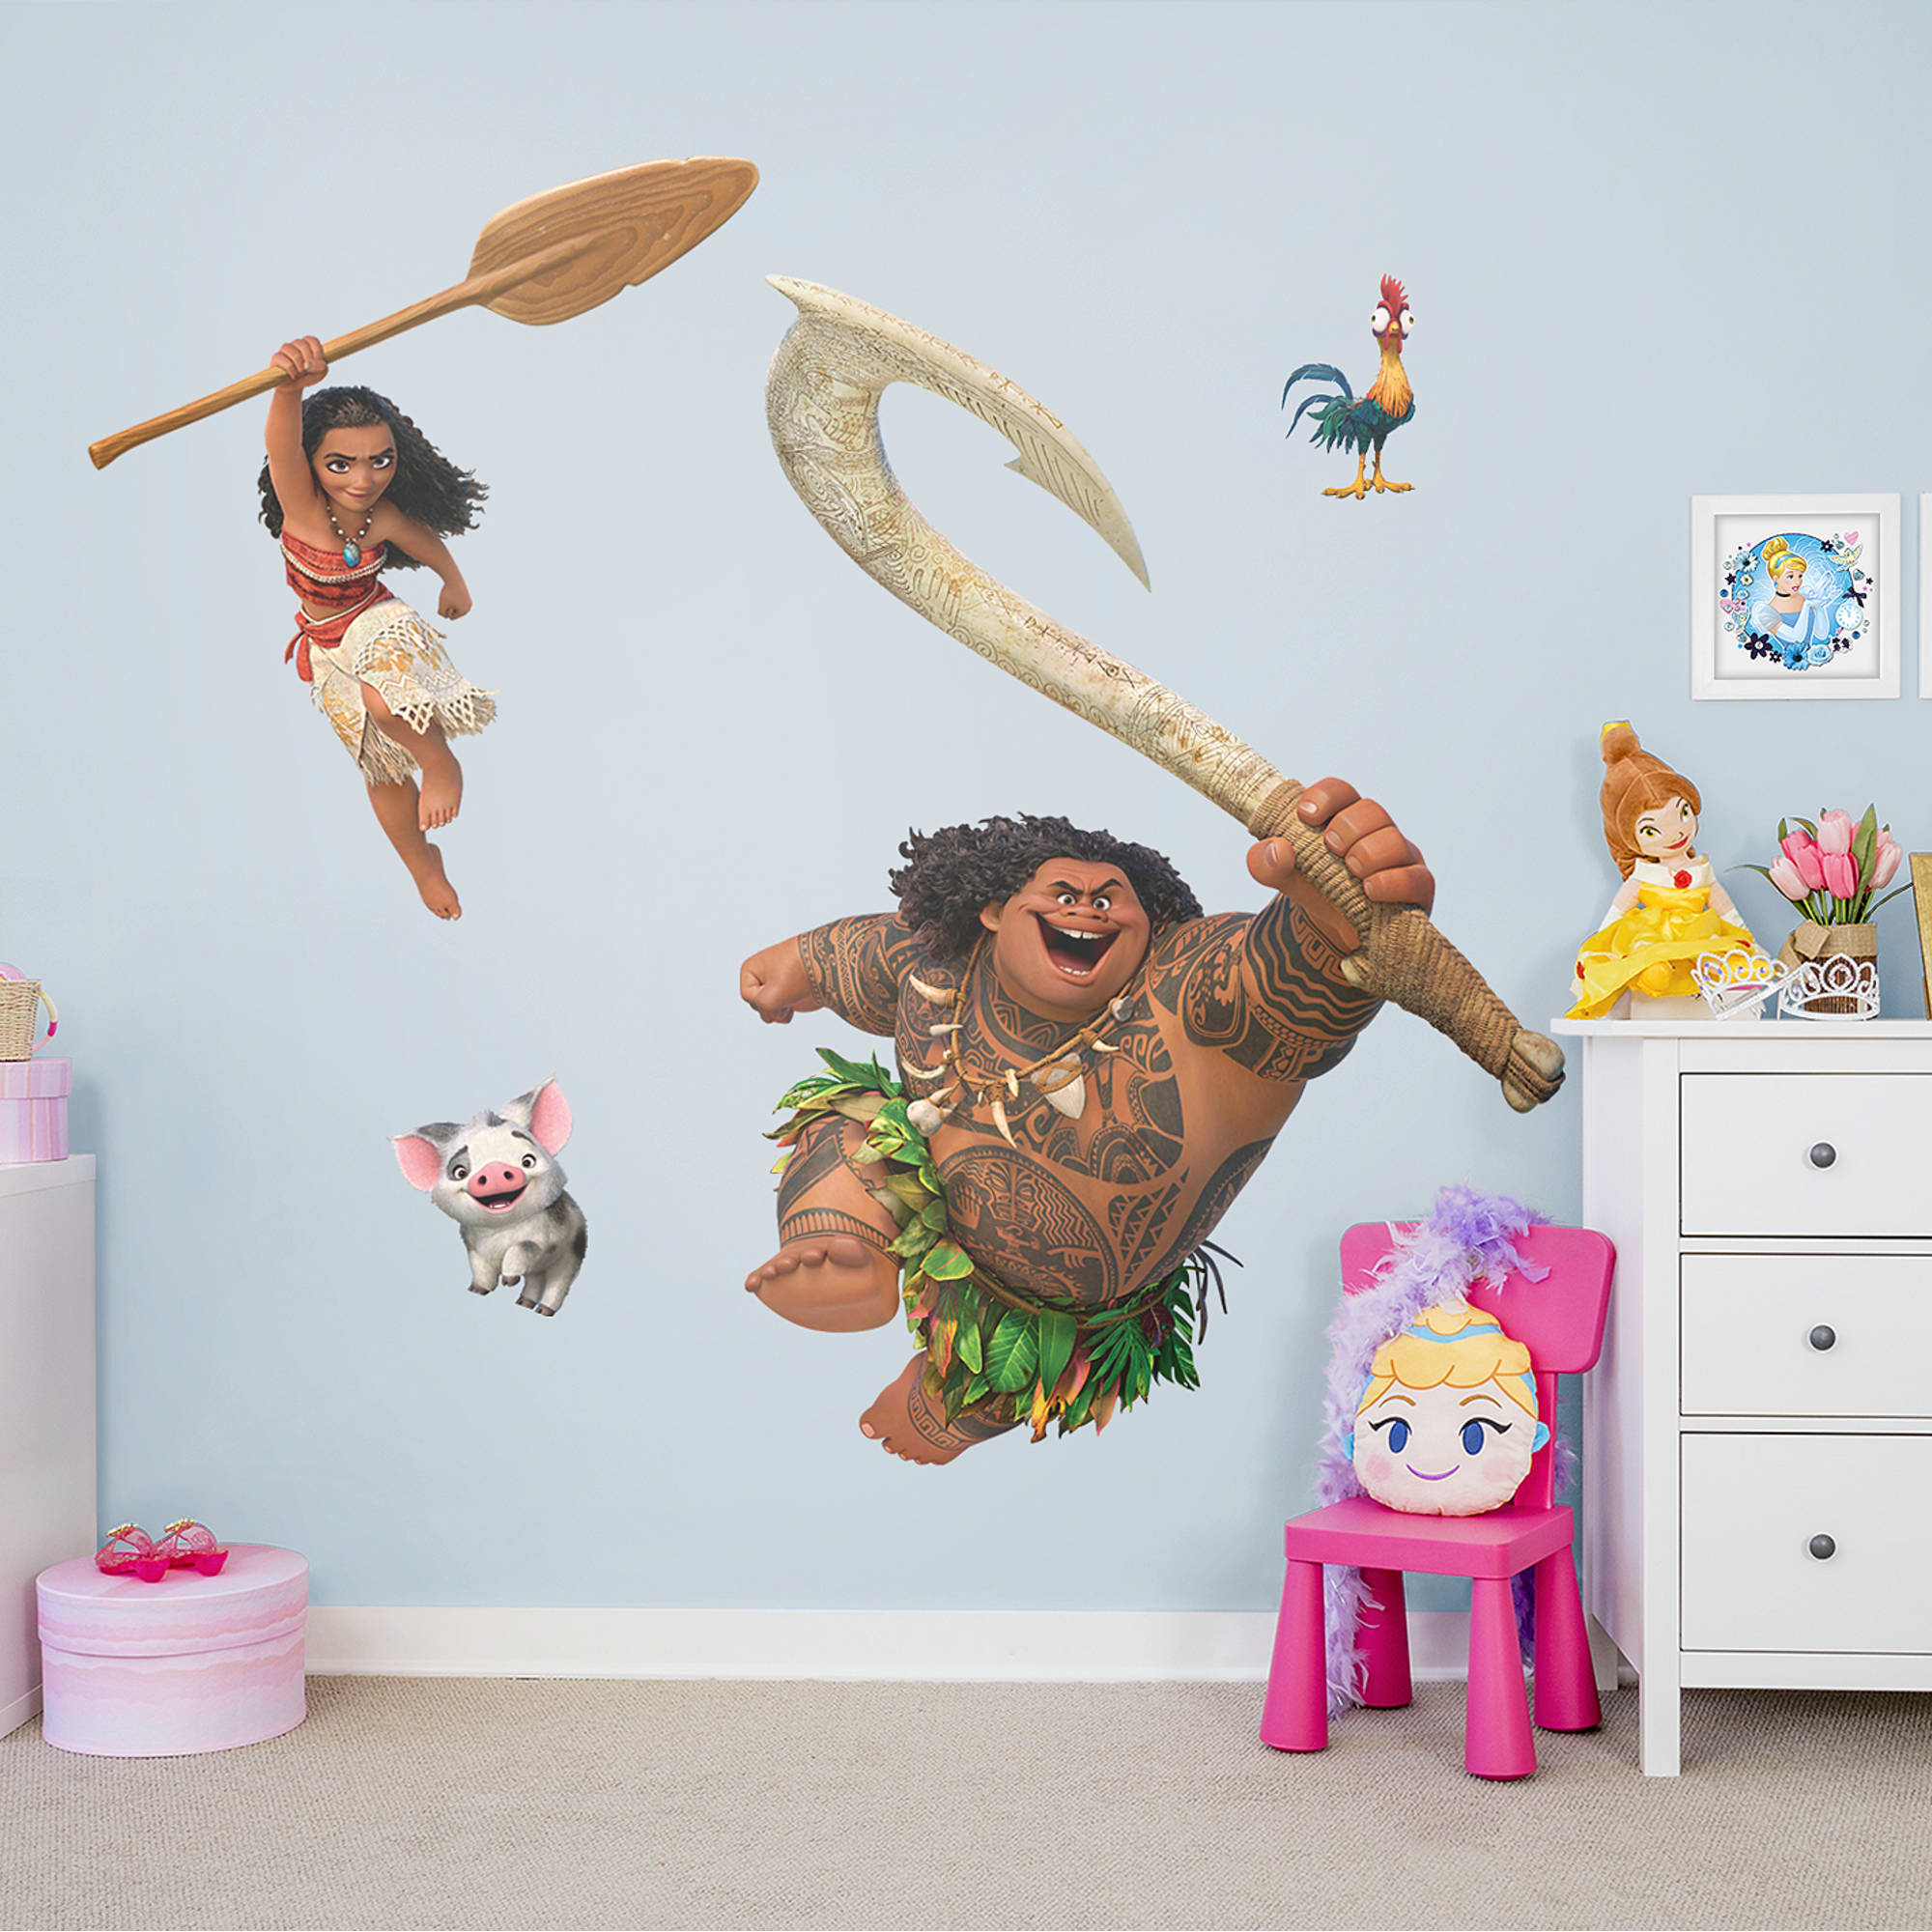 Moana: Collection - Officially Licensed Disney Removable Wall Decals 72.0"W x 48.0"H by Fathead | Vinyl